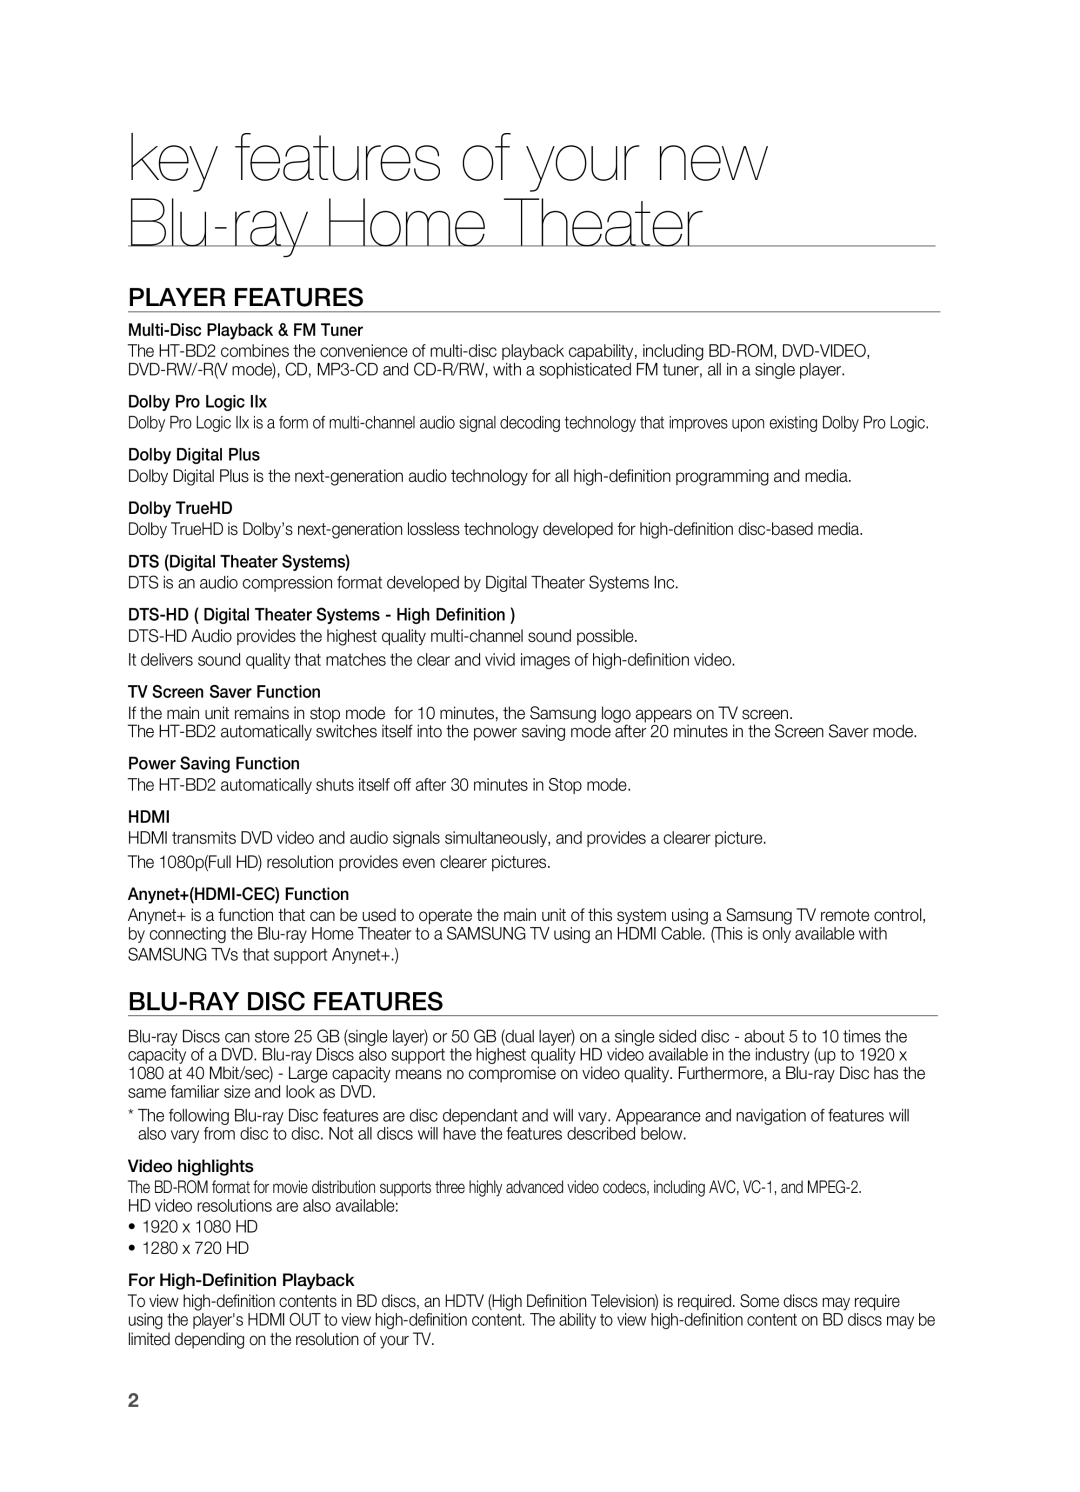 Samsung AH68-02019S manual key features of your new Blu-rayHome Theater, Player Features, Blu-Raydisc Features 